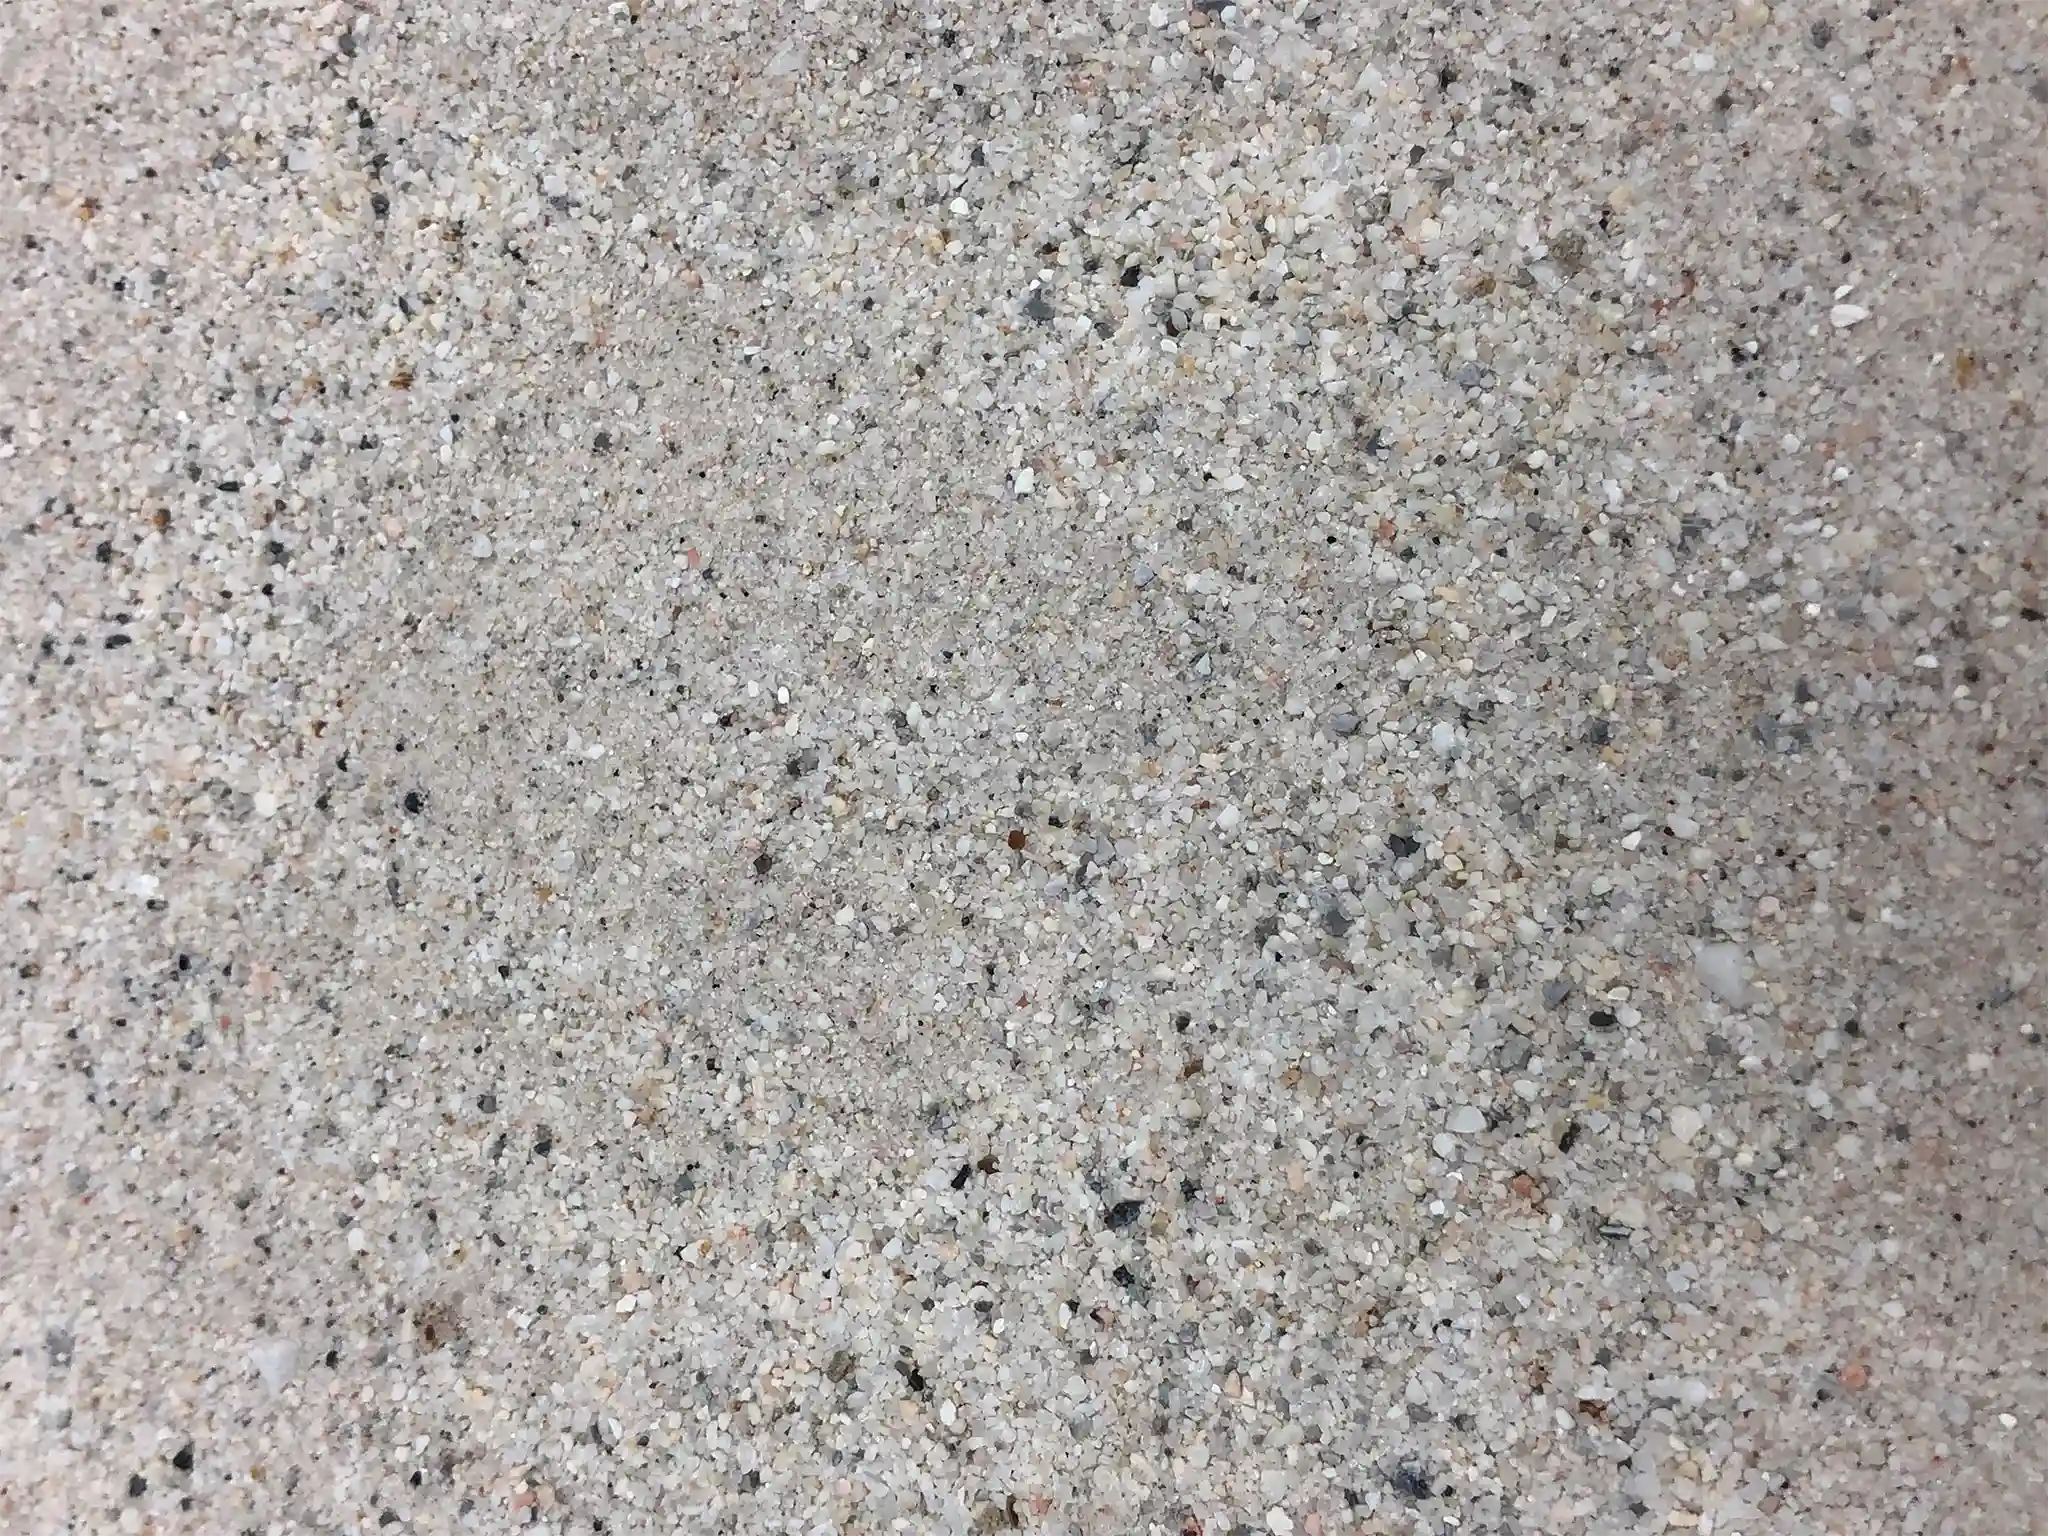 A close-up view of Premier Play sand.